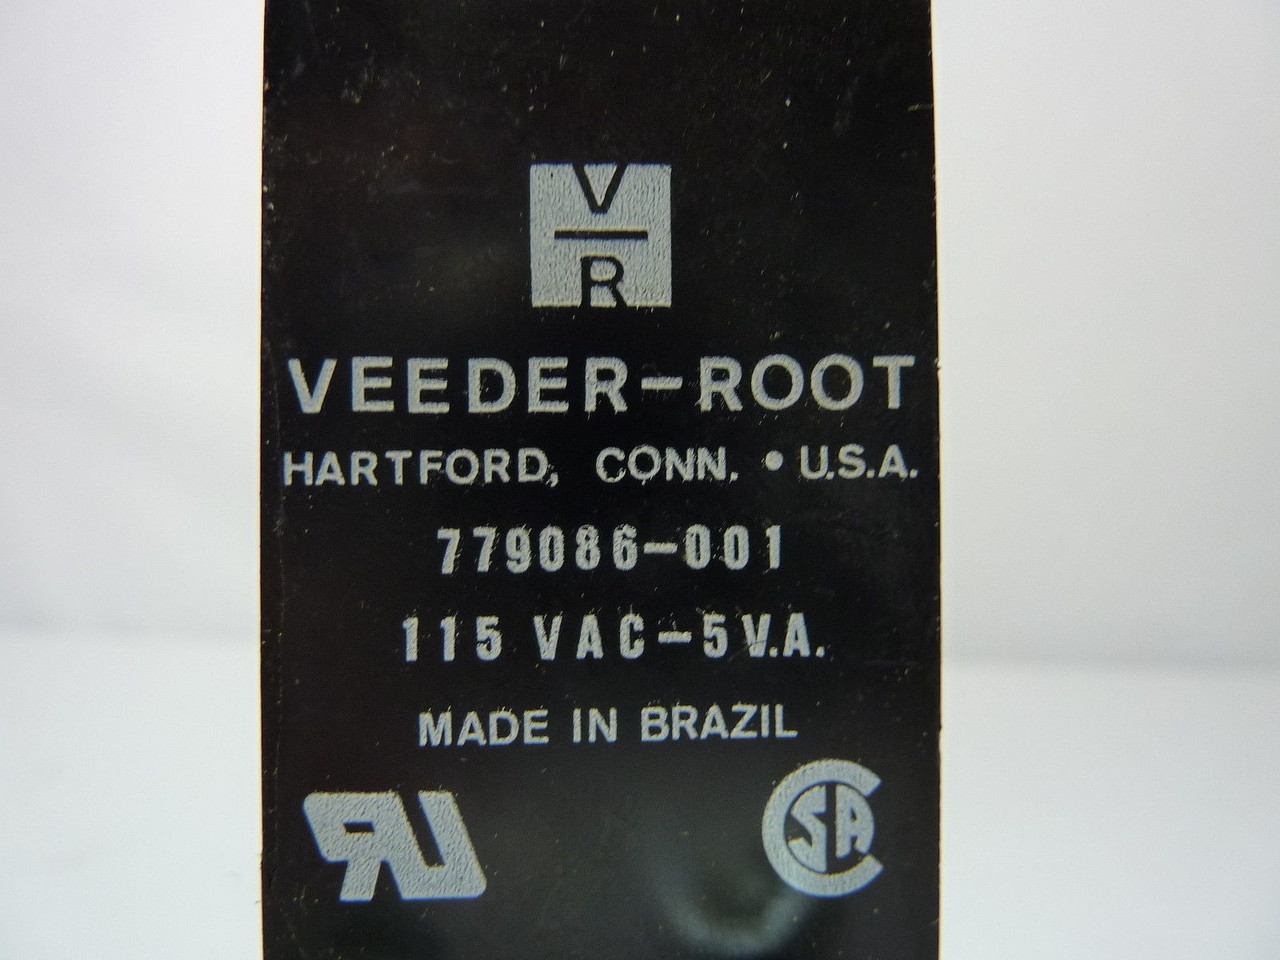 Veeder Root 779086-001 Miniature Electrical Base Mount 115VAC USED